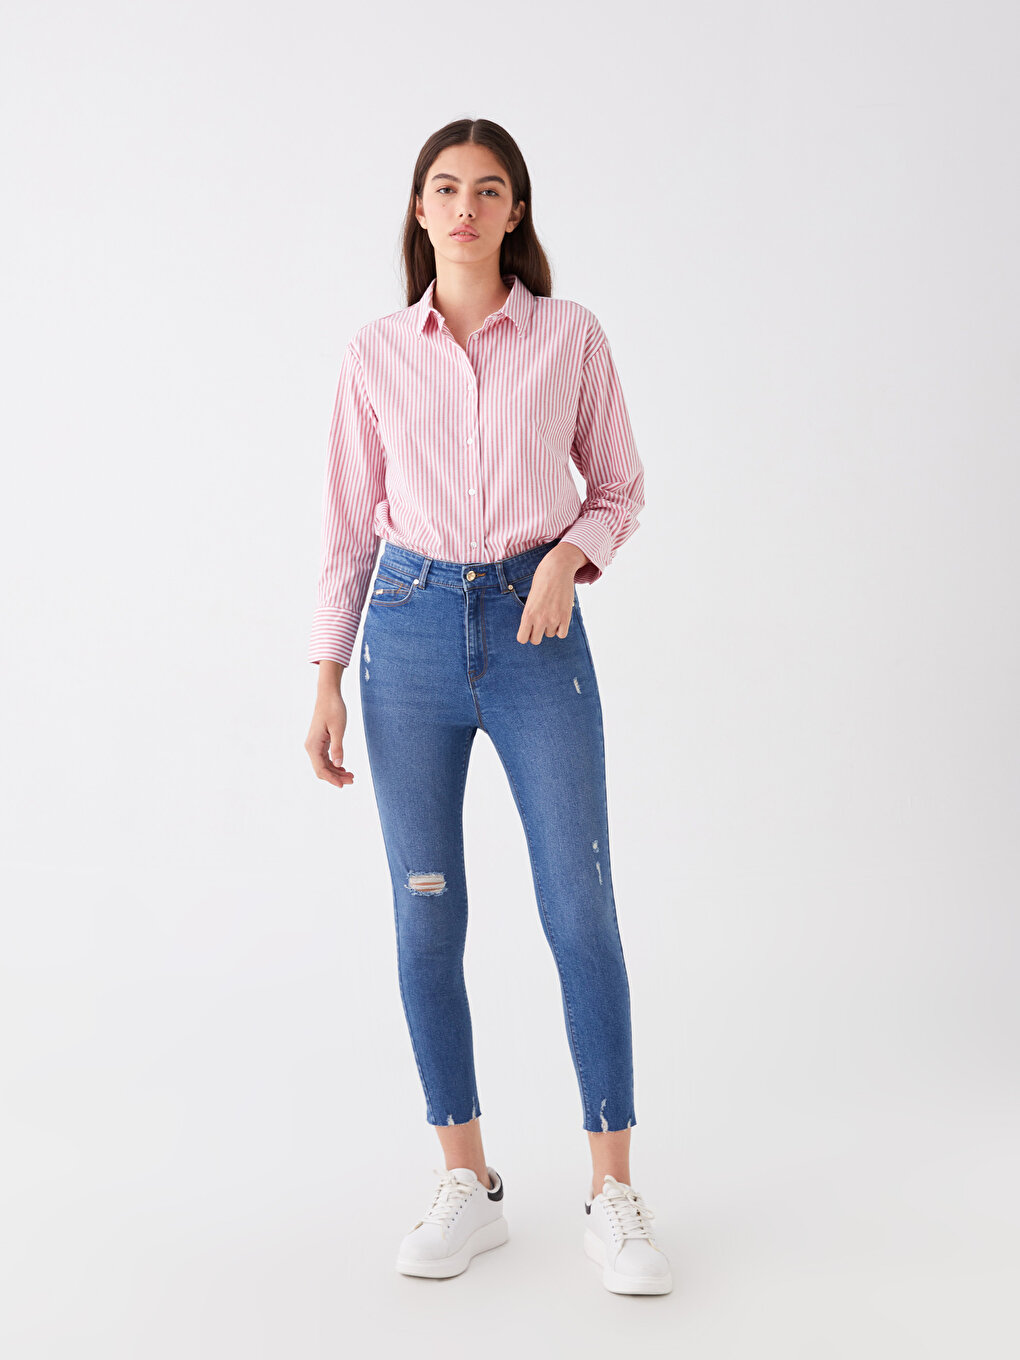 Ladies Jeans Top Design Junior Wholesale Clothing Private Label Jeans Pants  (20180106) - China Jeans and Clothes price | Made-in-China.com